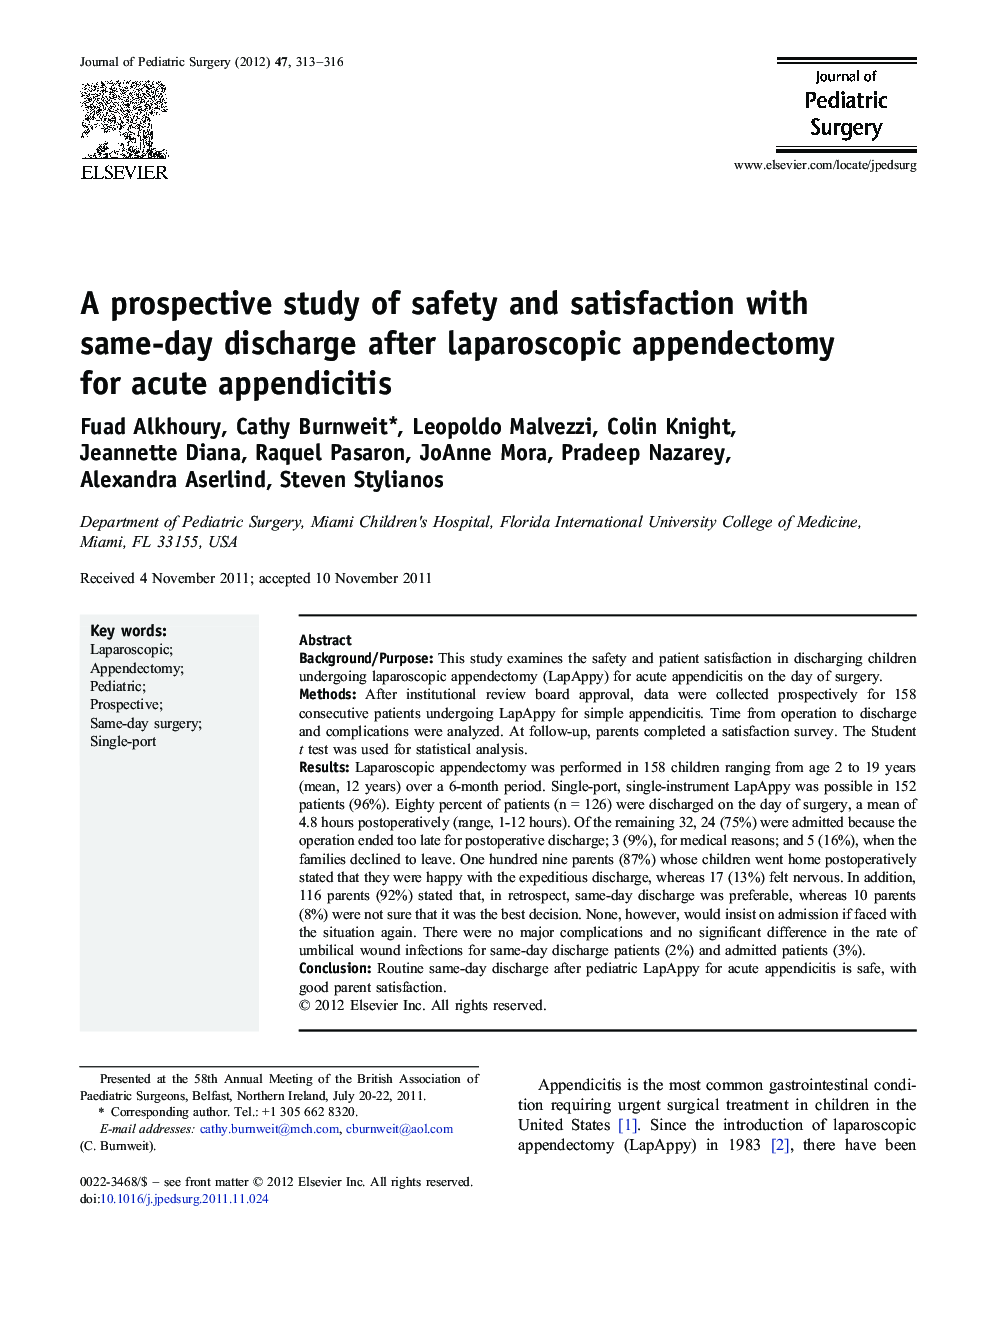 A prospective study of safety and satisfaction with same-day discharge after laparoscopic appendectomy for acute appendicitis 